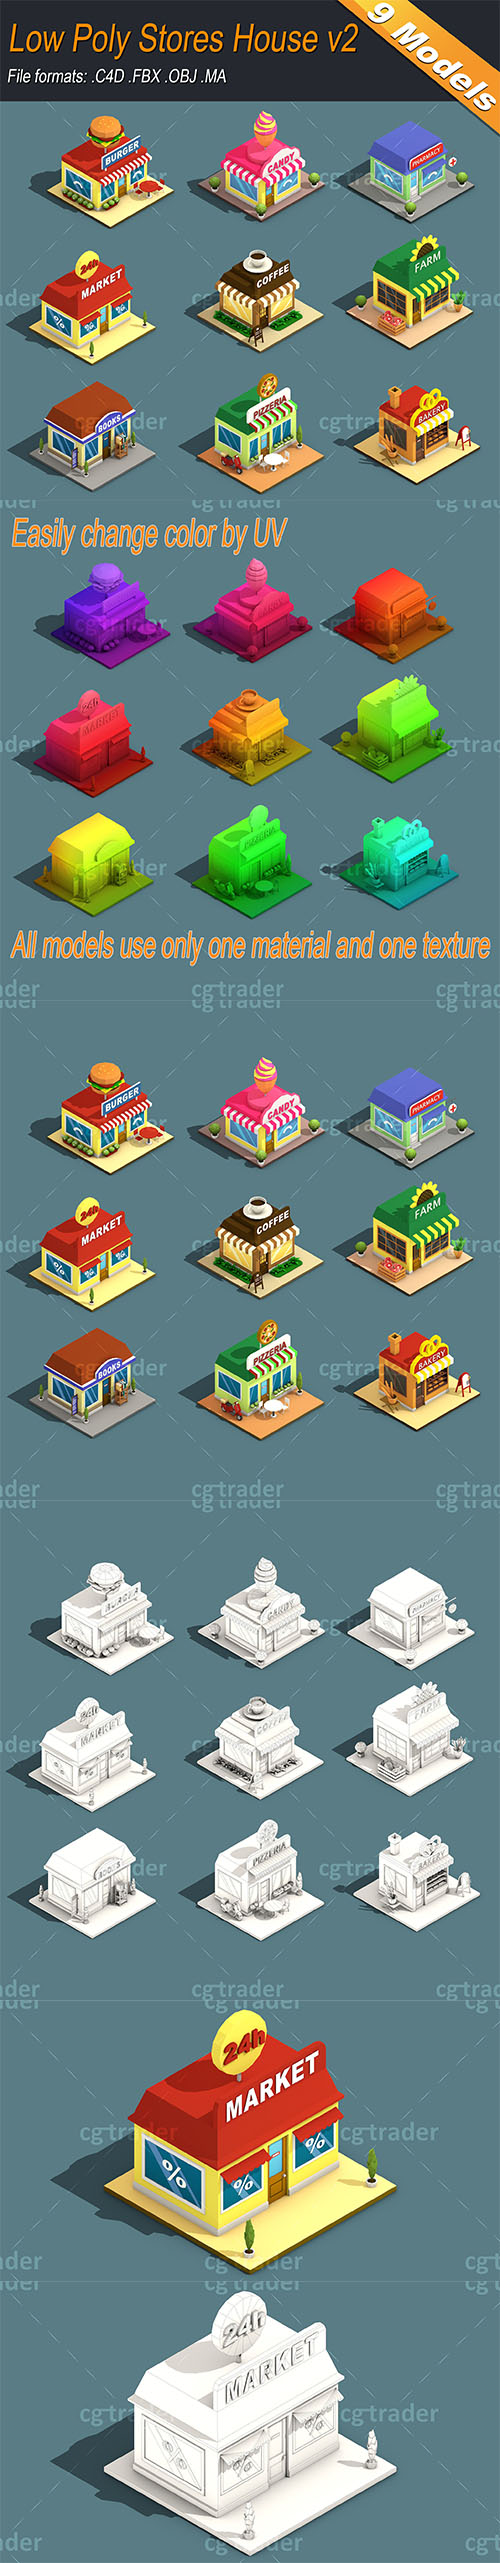 Low Poly Stores House ver 2 Isometric Low-poly 3D model